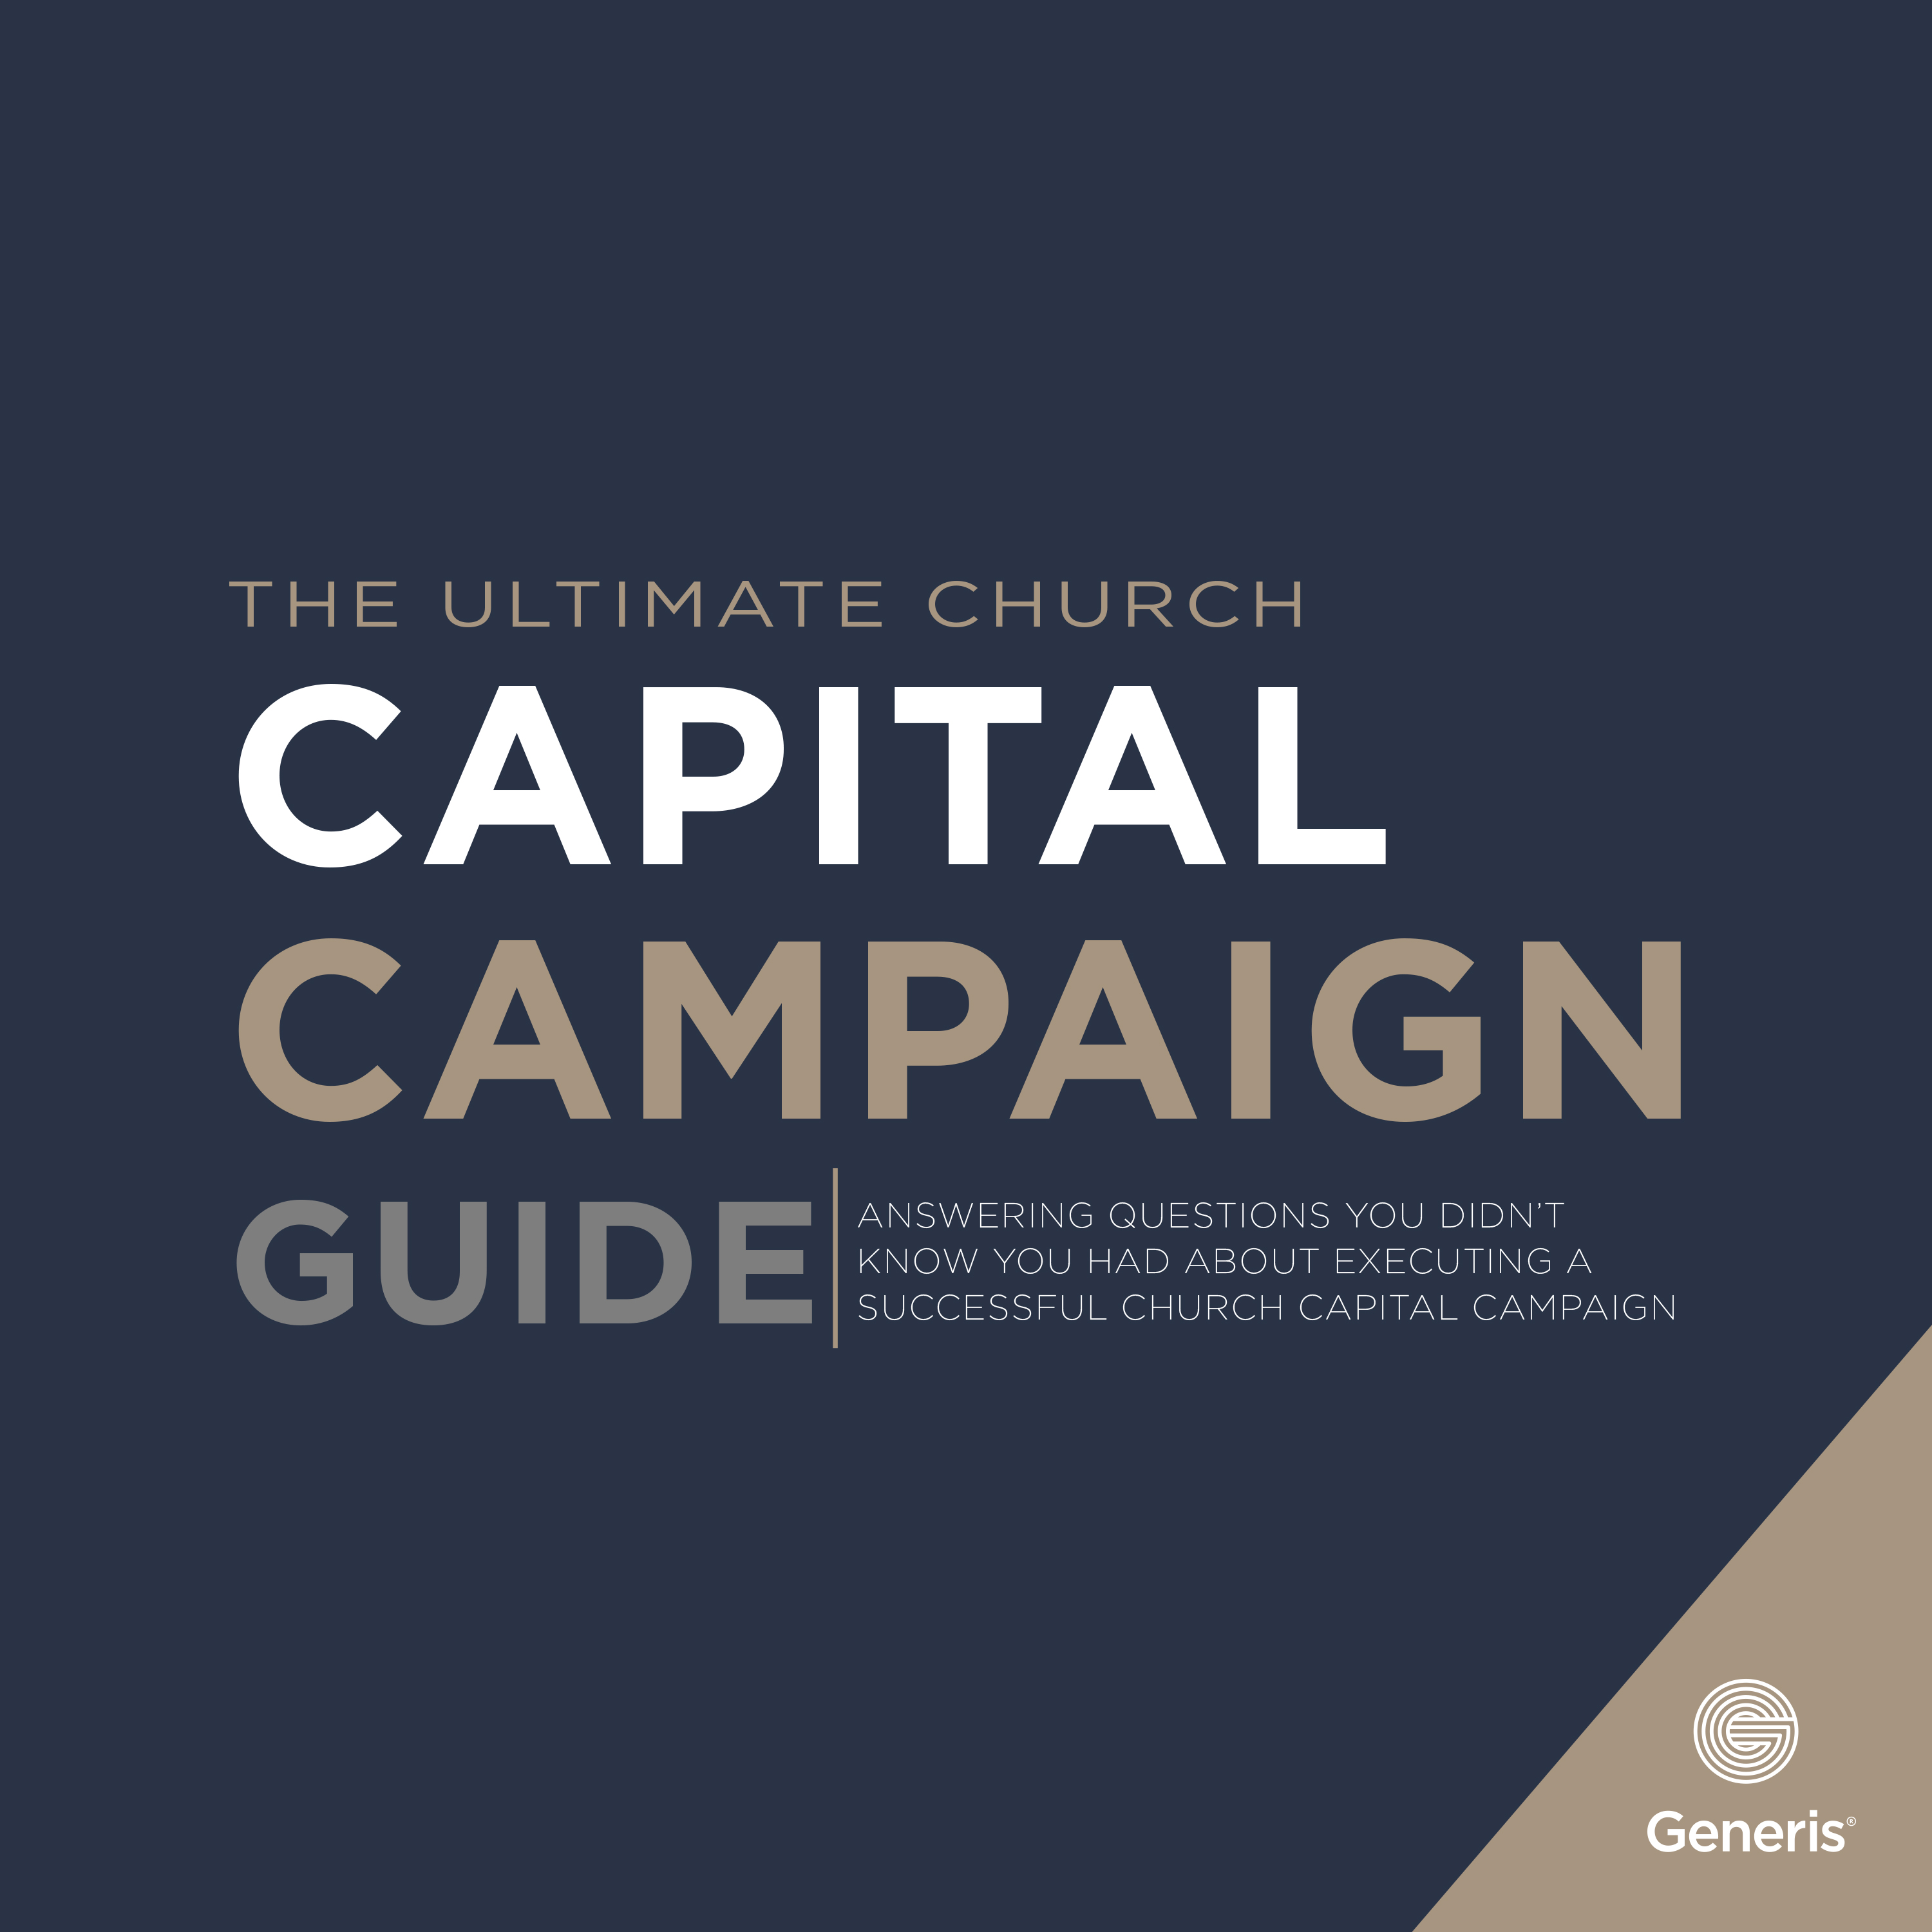 The Ultimate Church Capital Campaign Guide